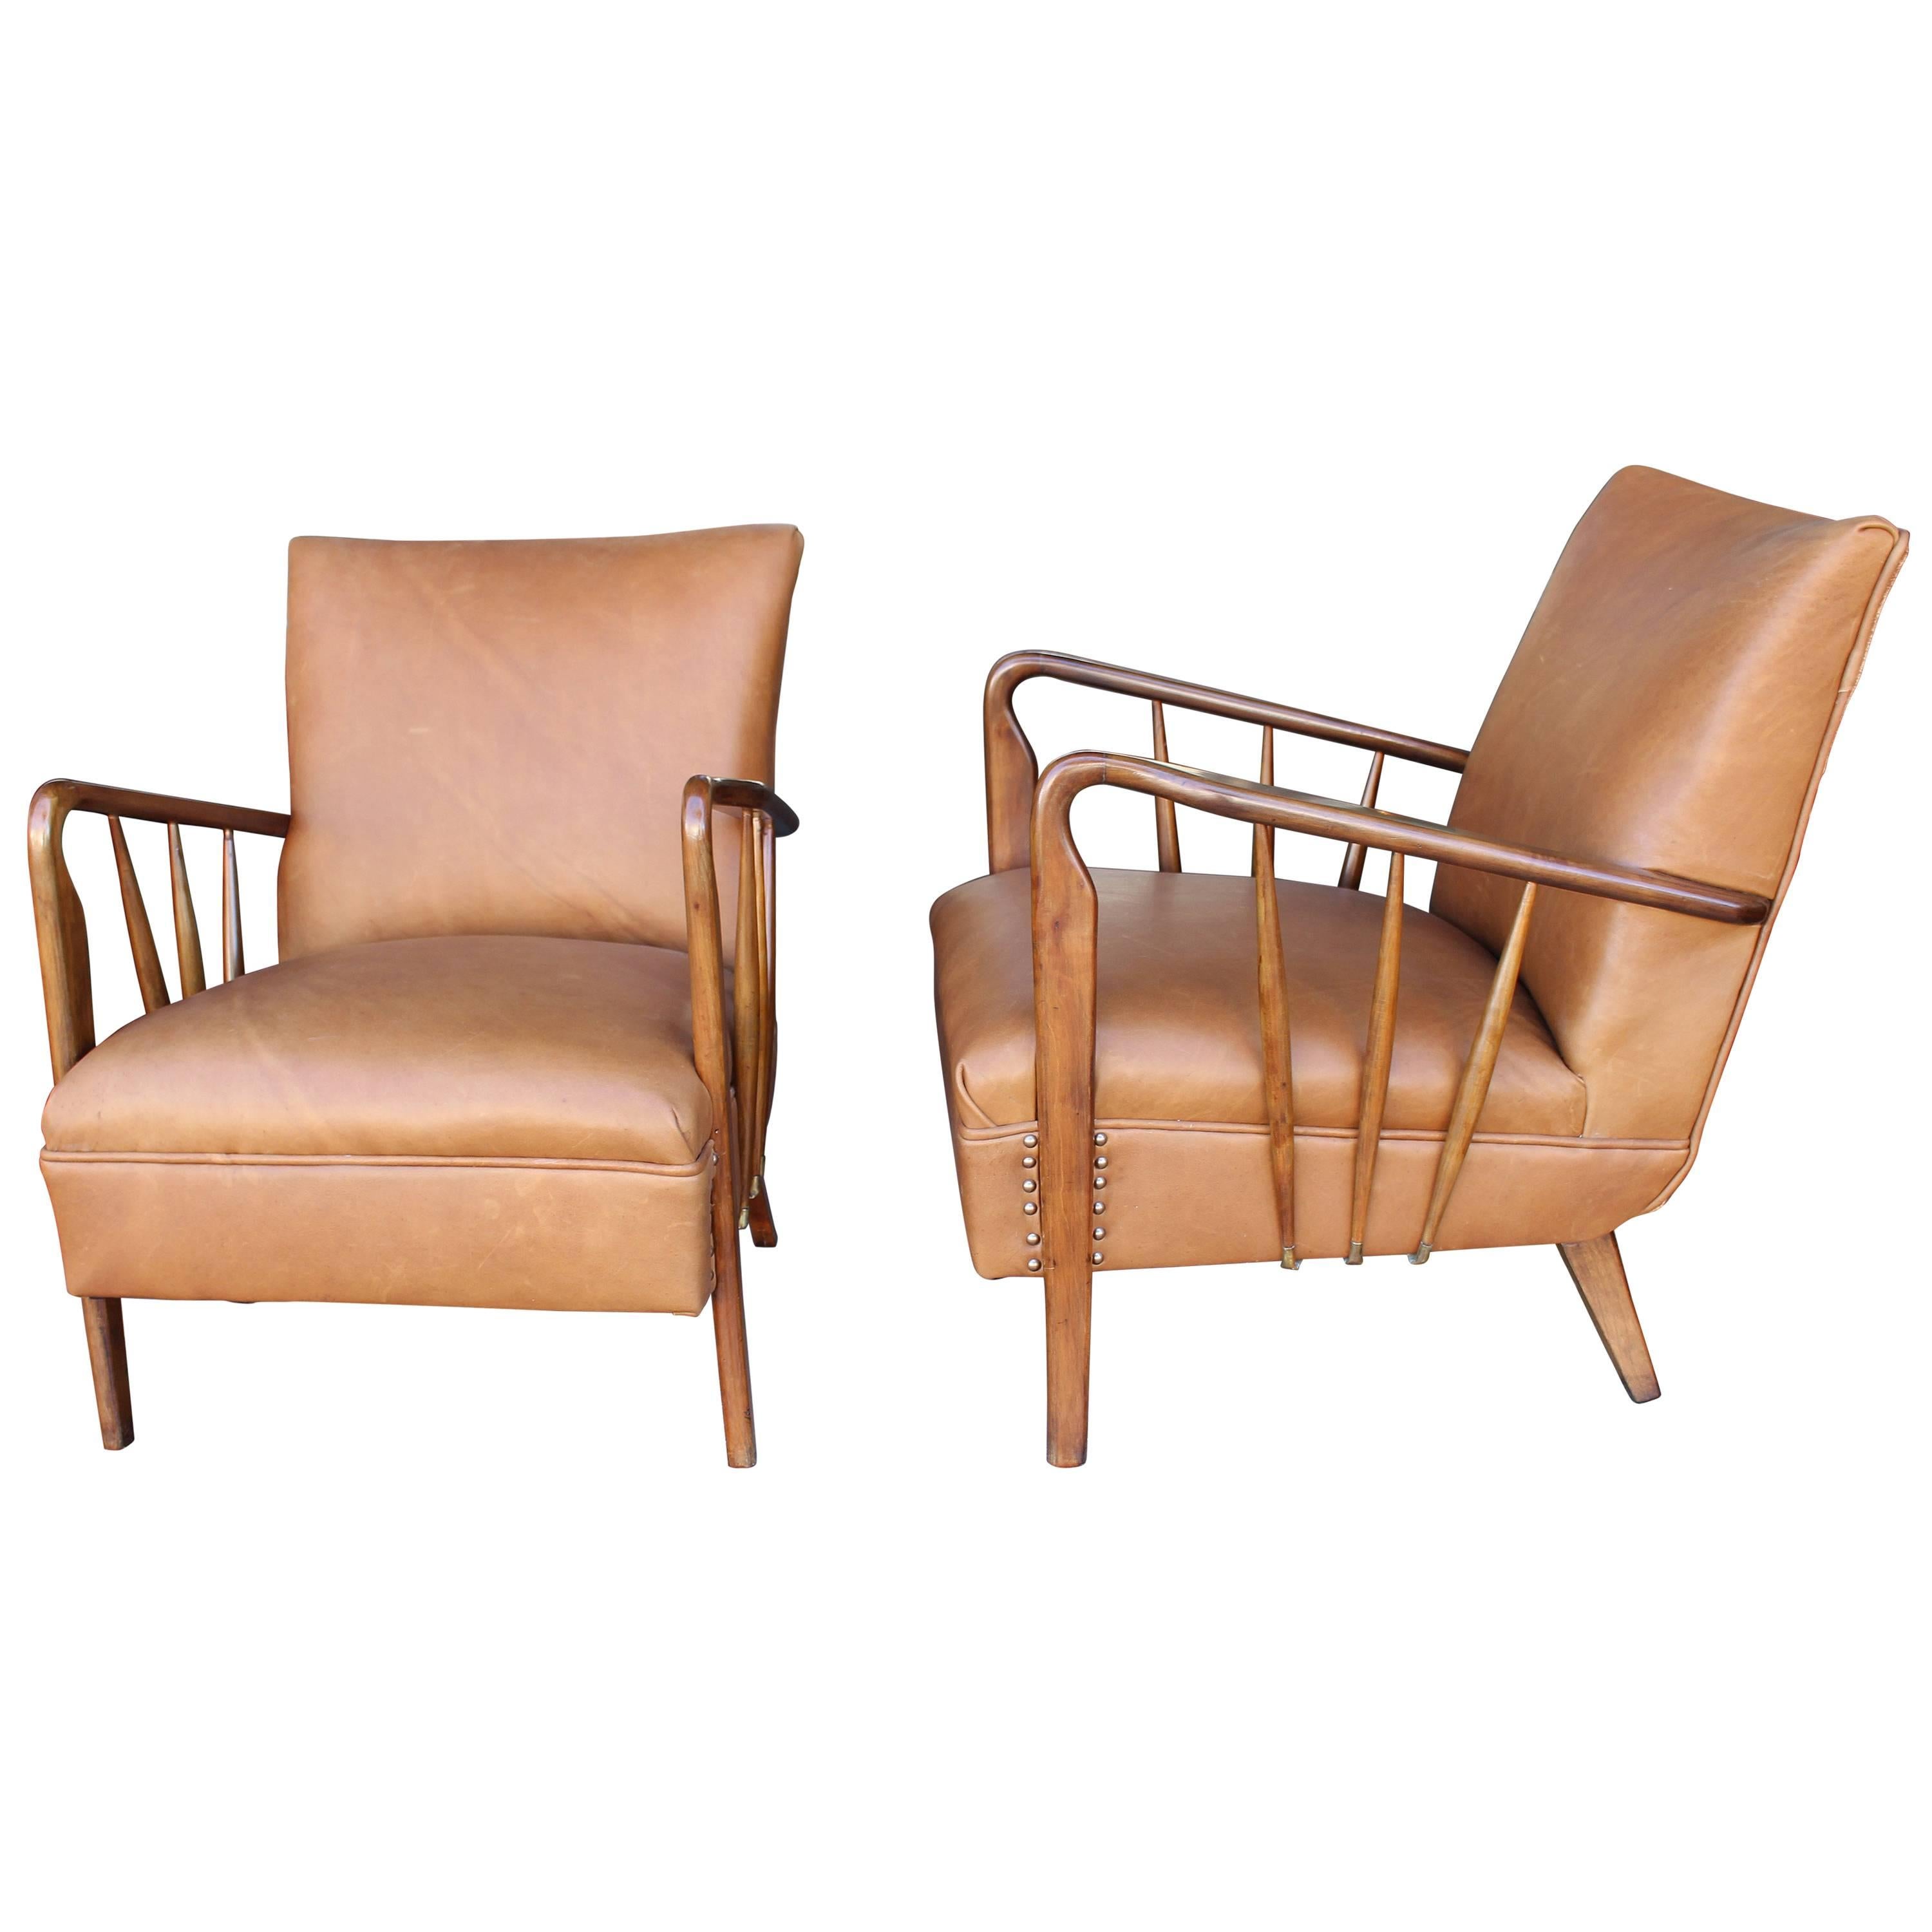 Italian Pair of Chairs Attributed to Guglielmo Ulrich